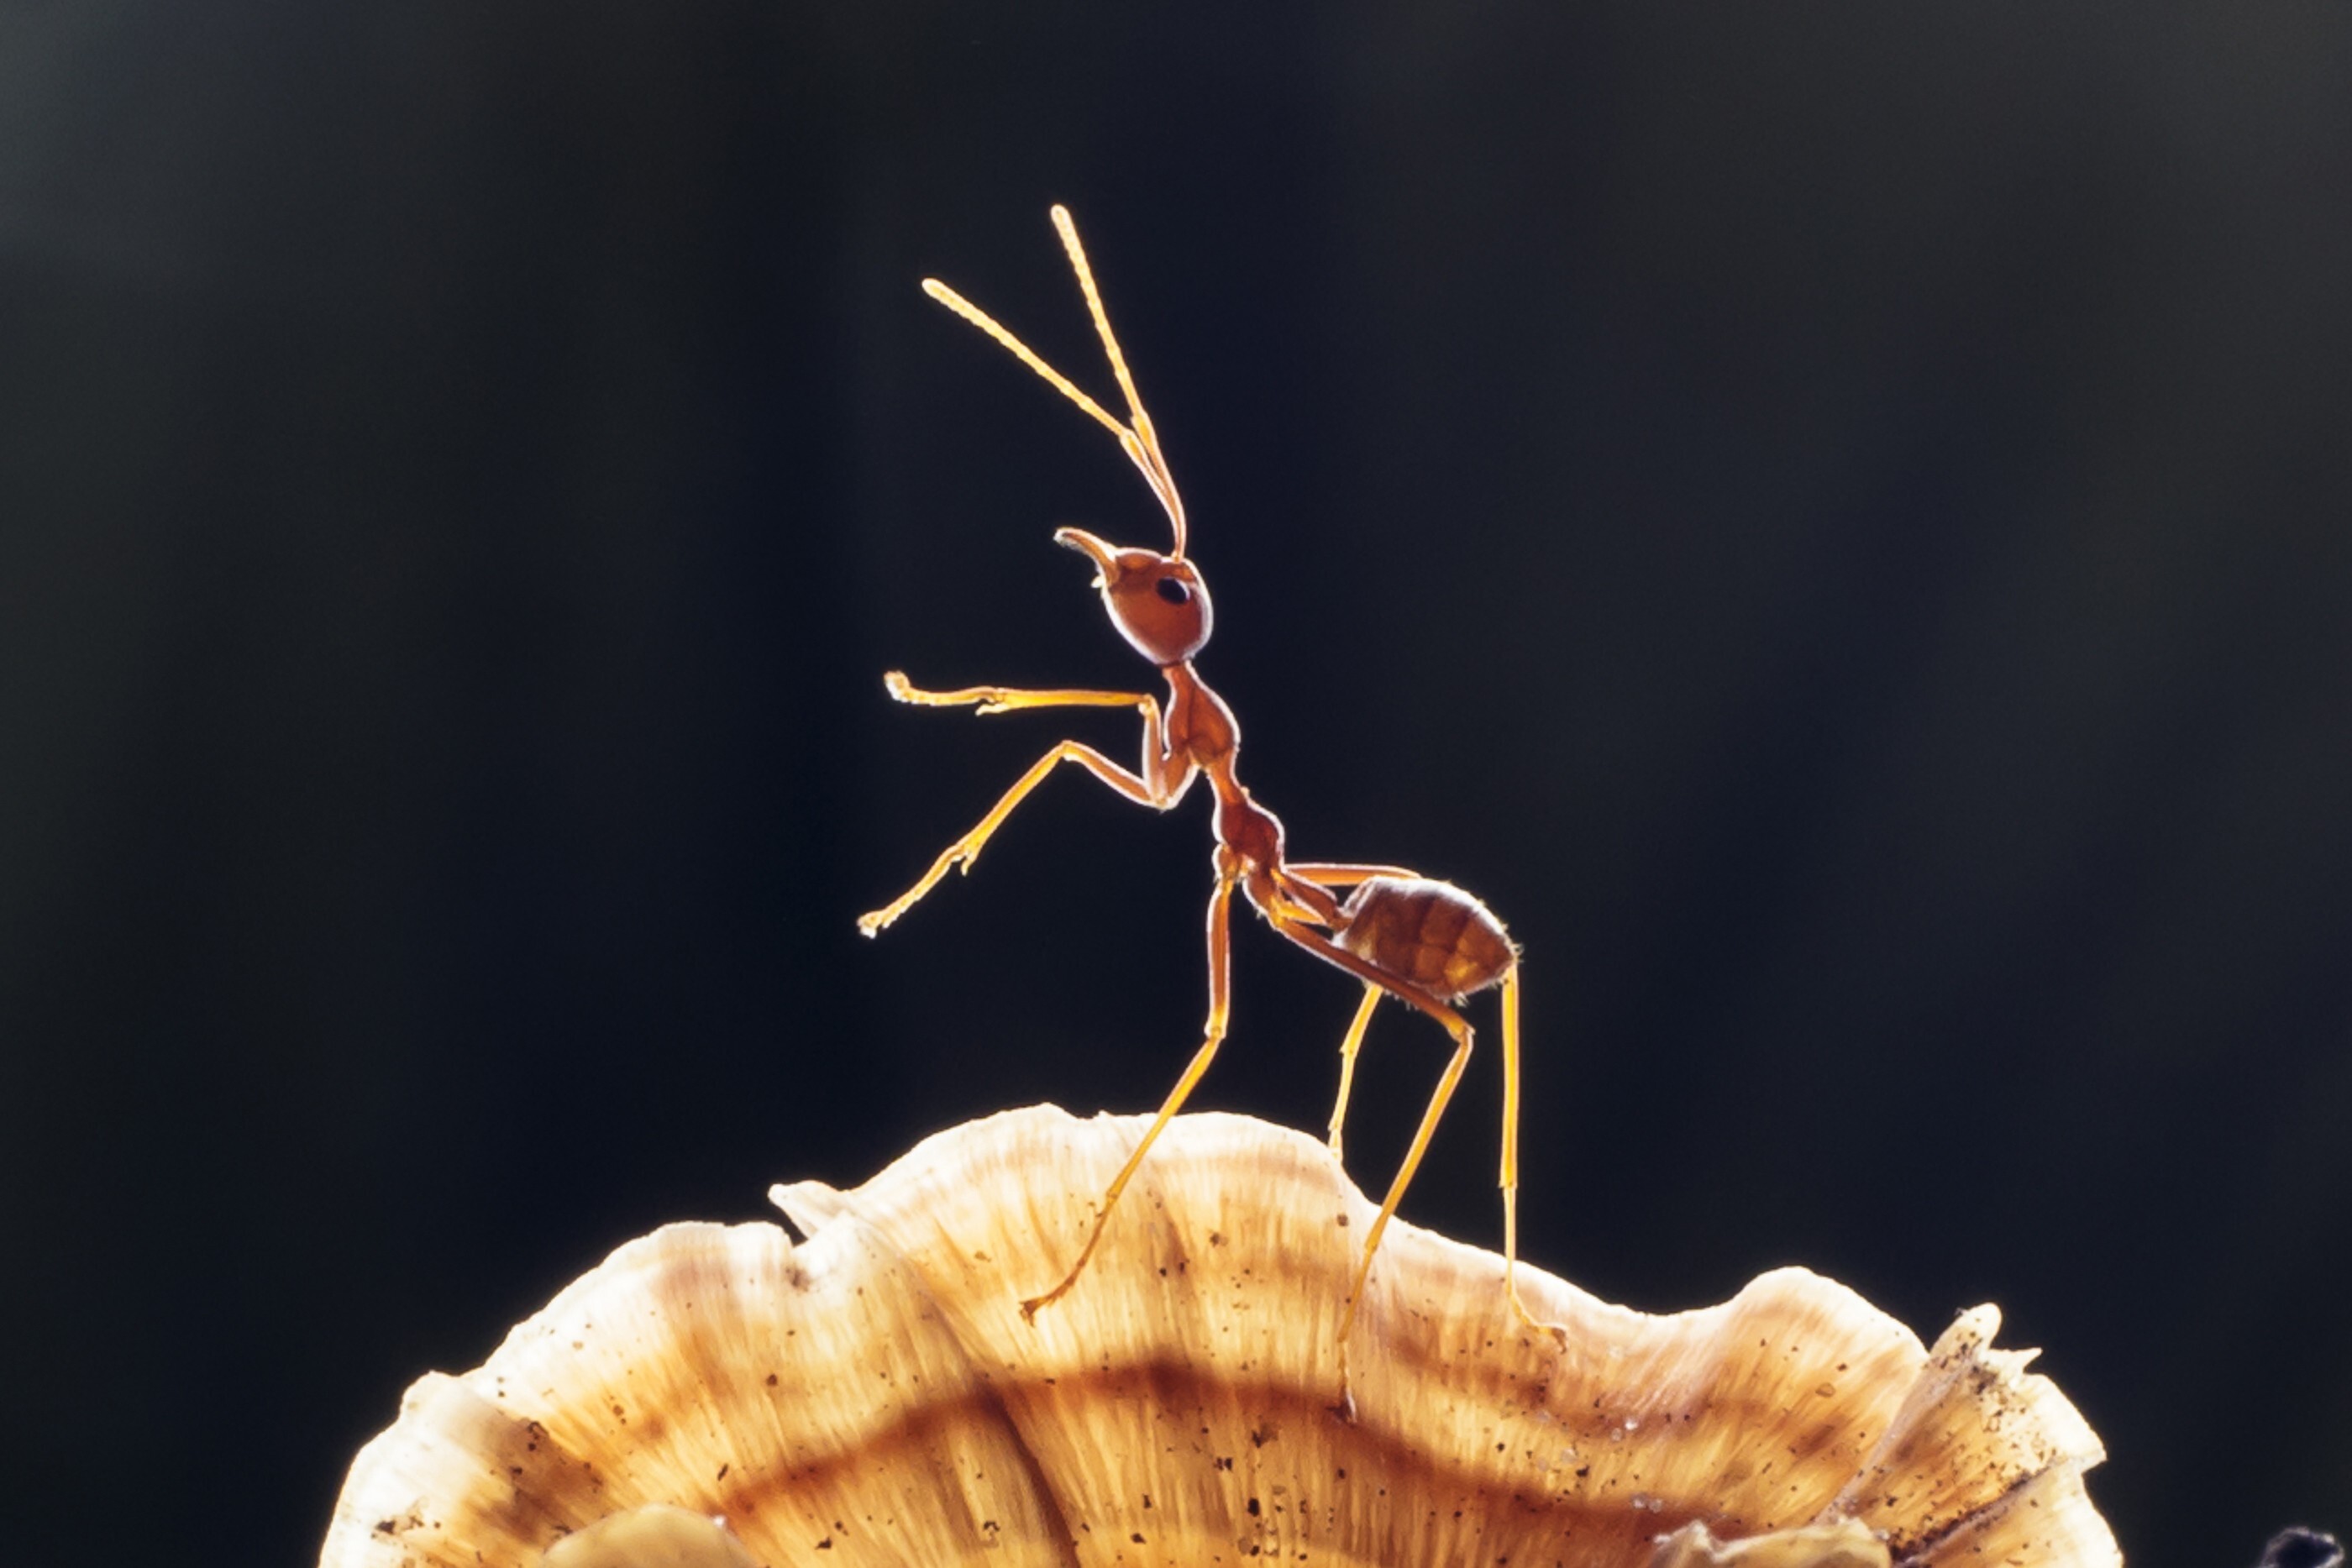 Ant drama can be absurd in the Facebook group. Photo: Shutterstock